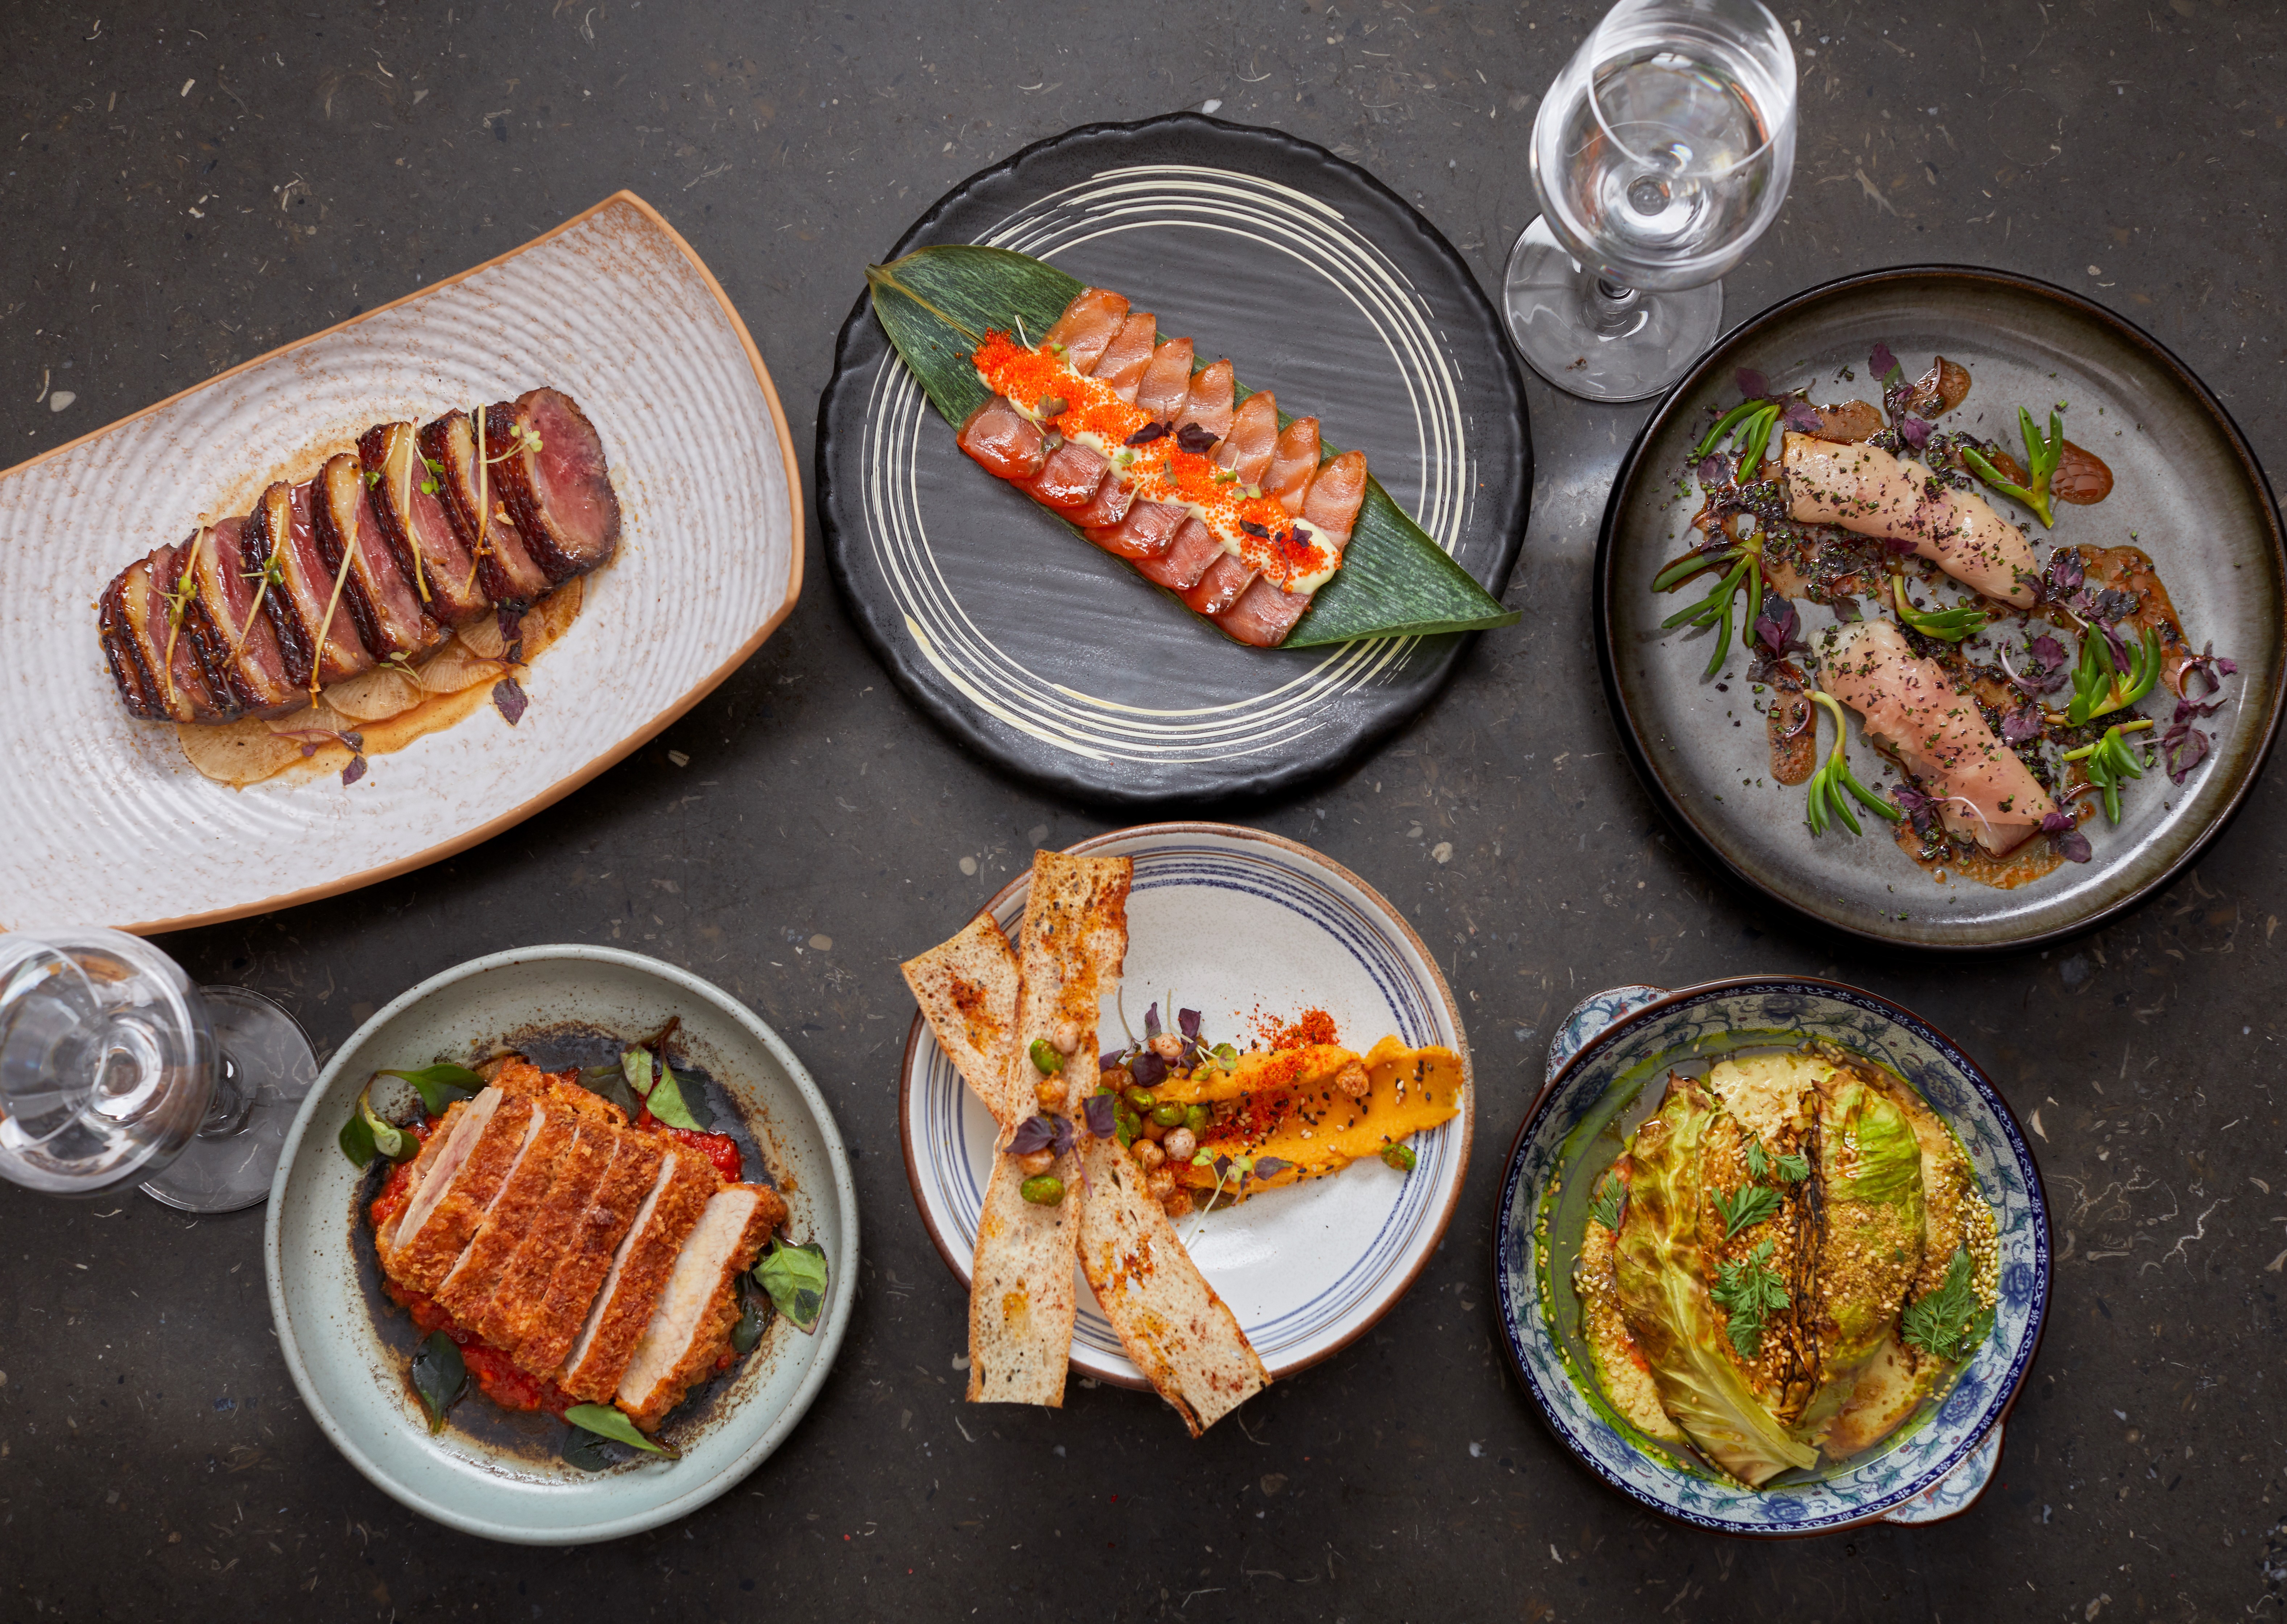 Contrasting tastes and textures are paired on the Madame Ching x TokyoLima collaboration menu, one of the eating highlights of Hong Kong’s dining scene this month